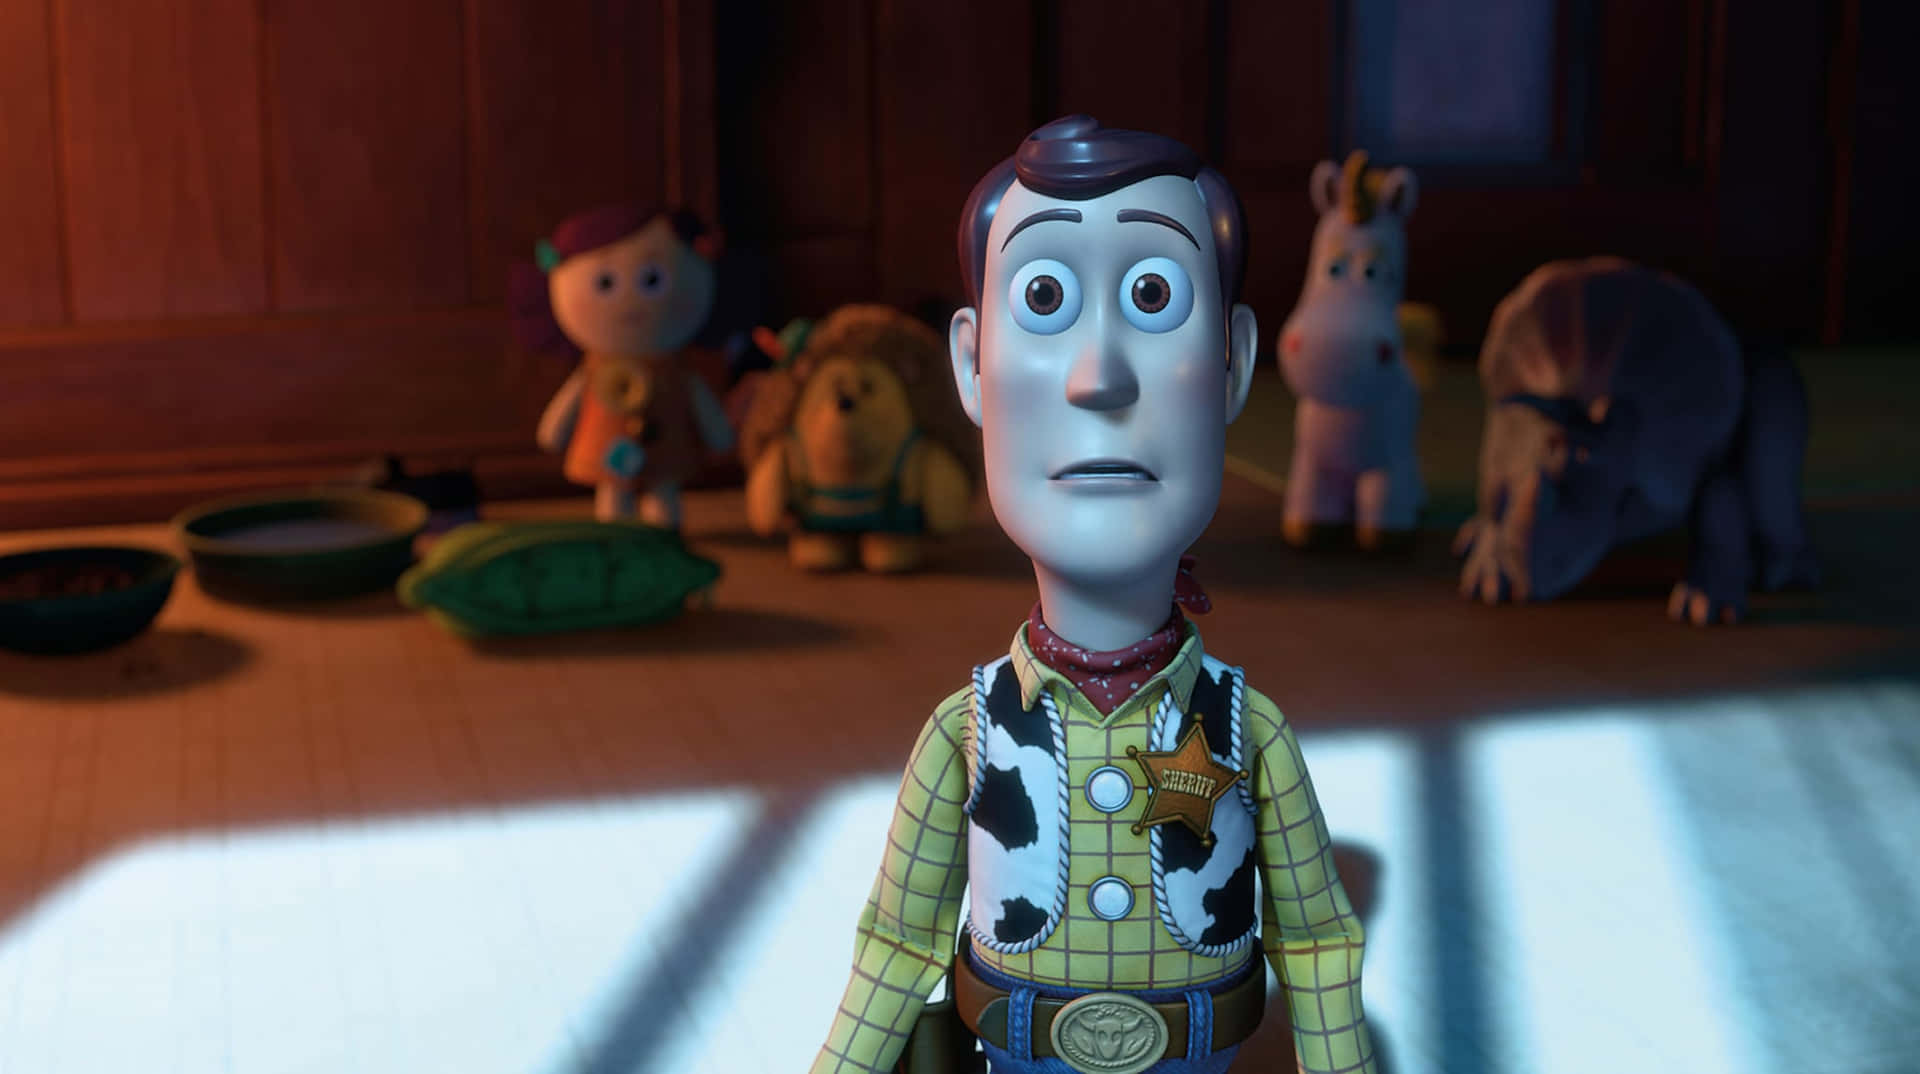 Bo Peep and Woody reunite in Toy Story 4